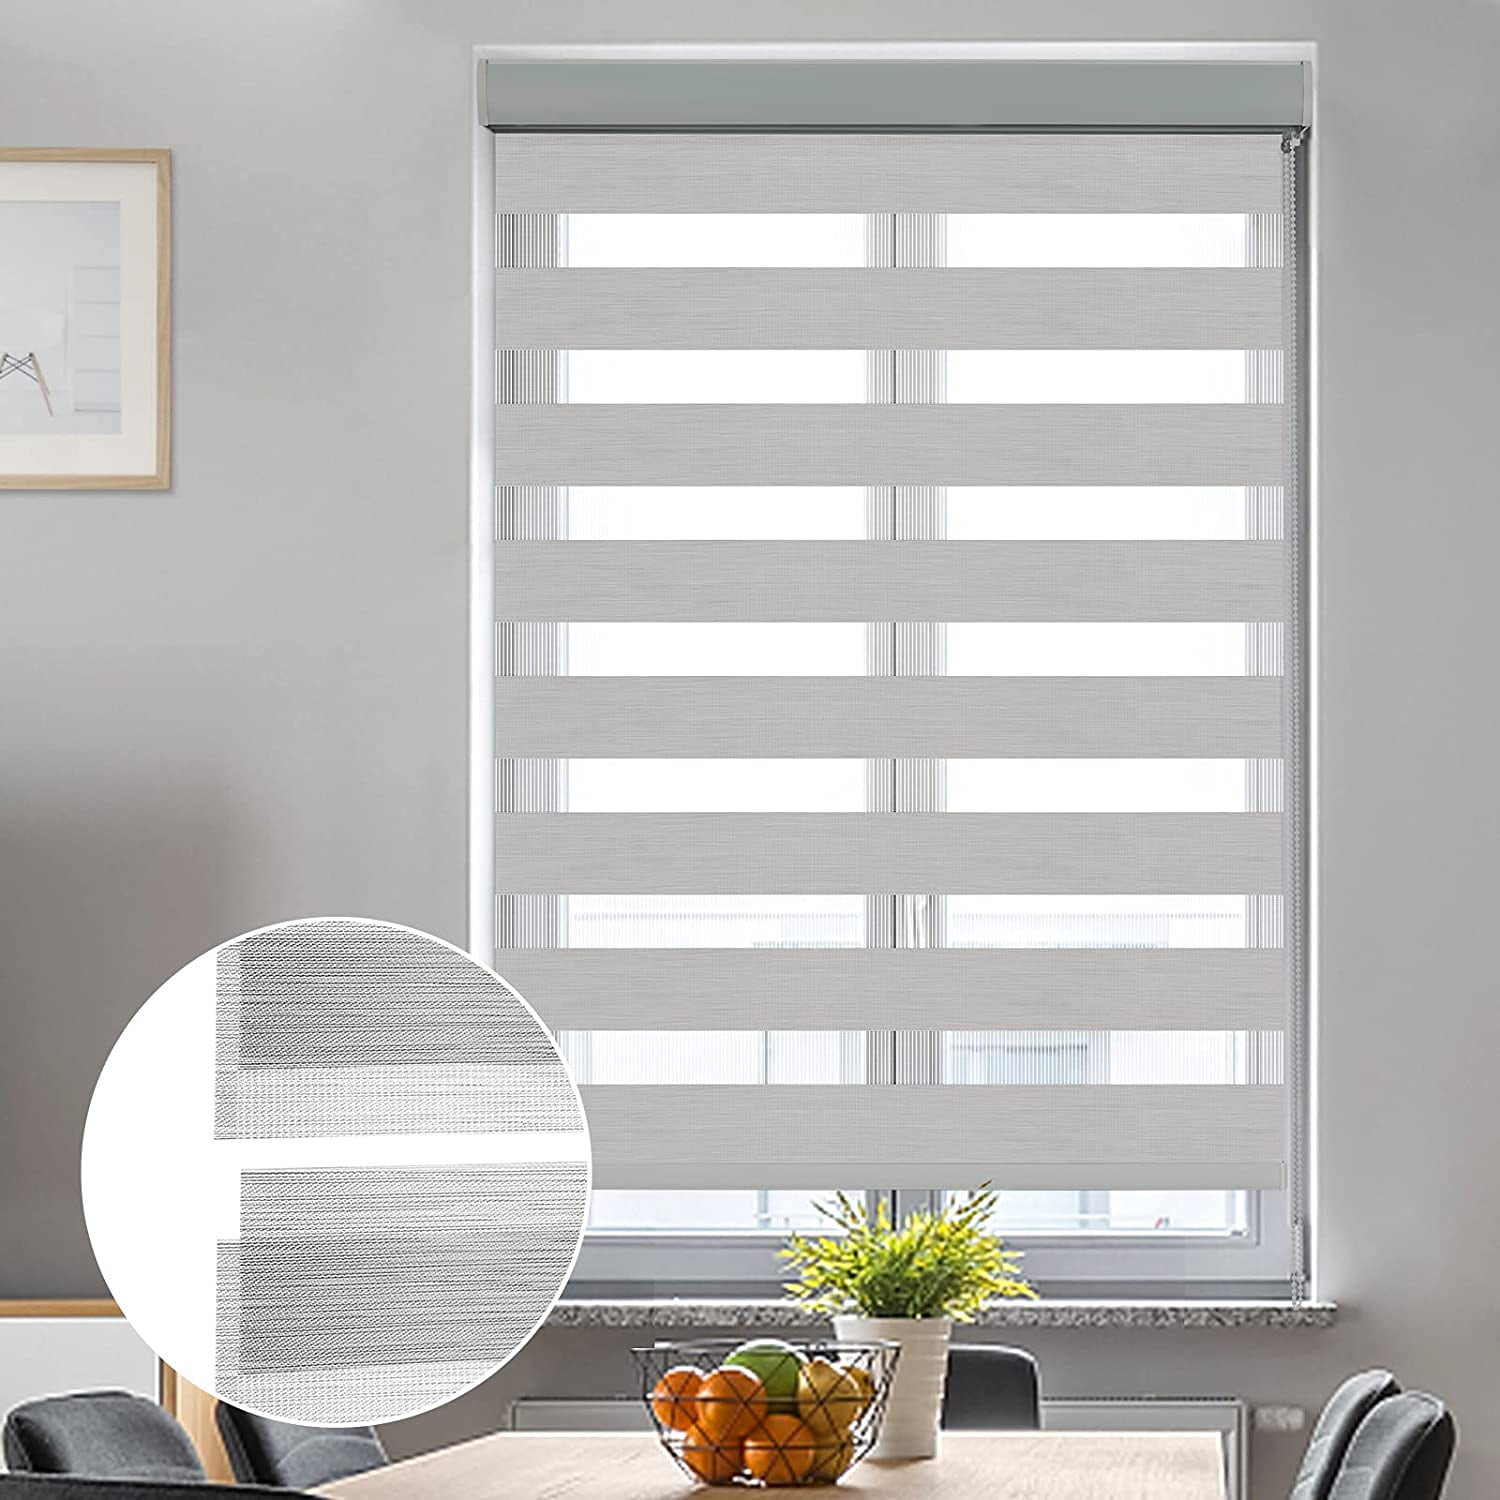 10 to 110 inch Wide Day and Night Window Drapes Foiresoft Custom Cut to Size White Sheer or Privacy Light Control Basic W 10 x H 55 inch Zebra Roller Blinds Dual Layer Shades